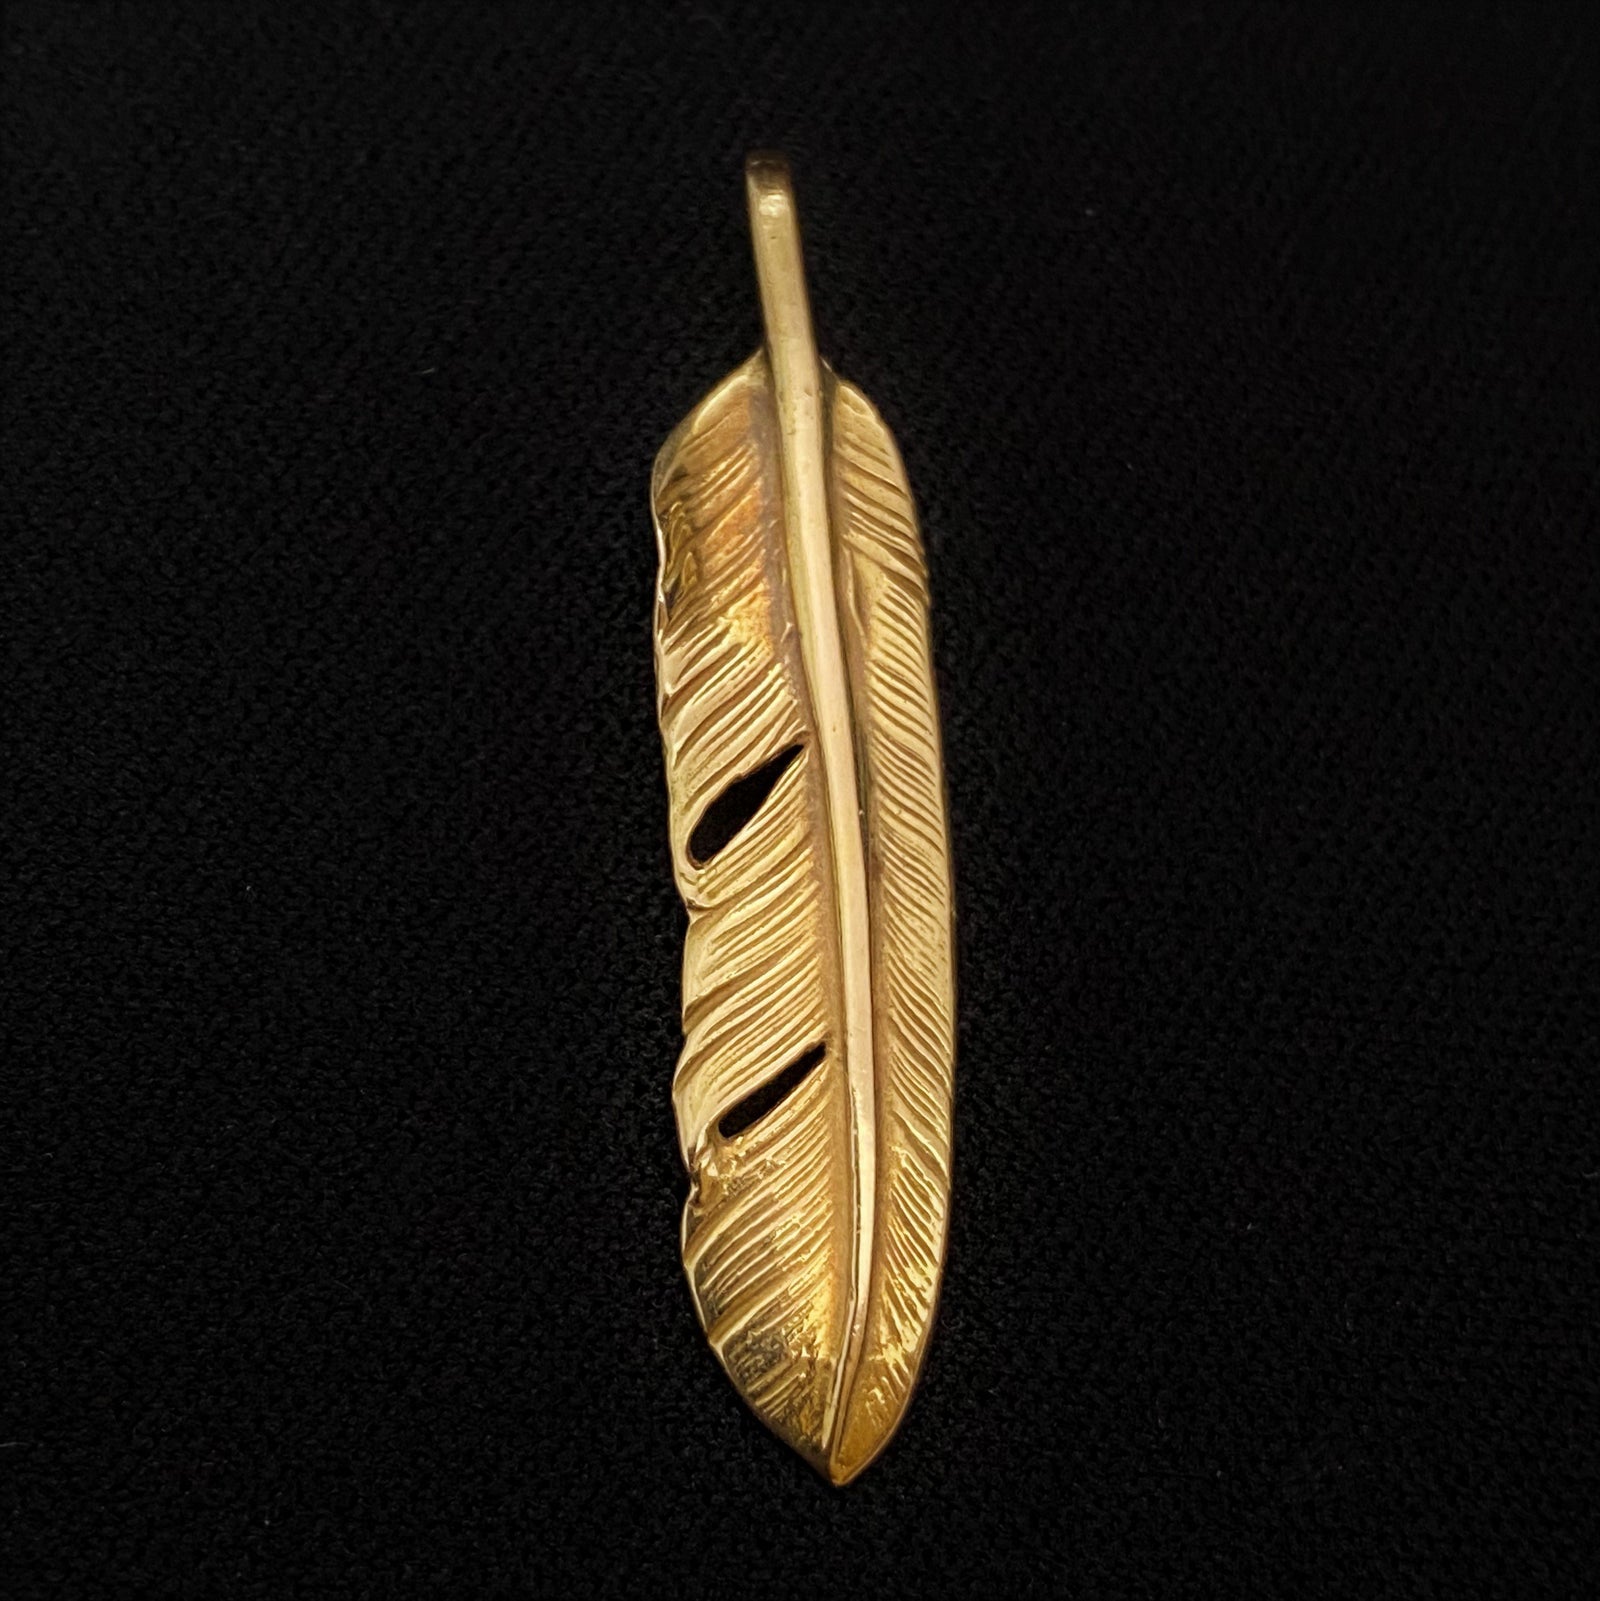 Gold Feather Facing Right - Native Feather | 日本のGoro's専門店